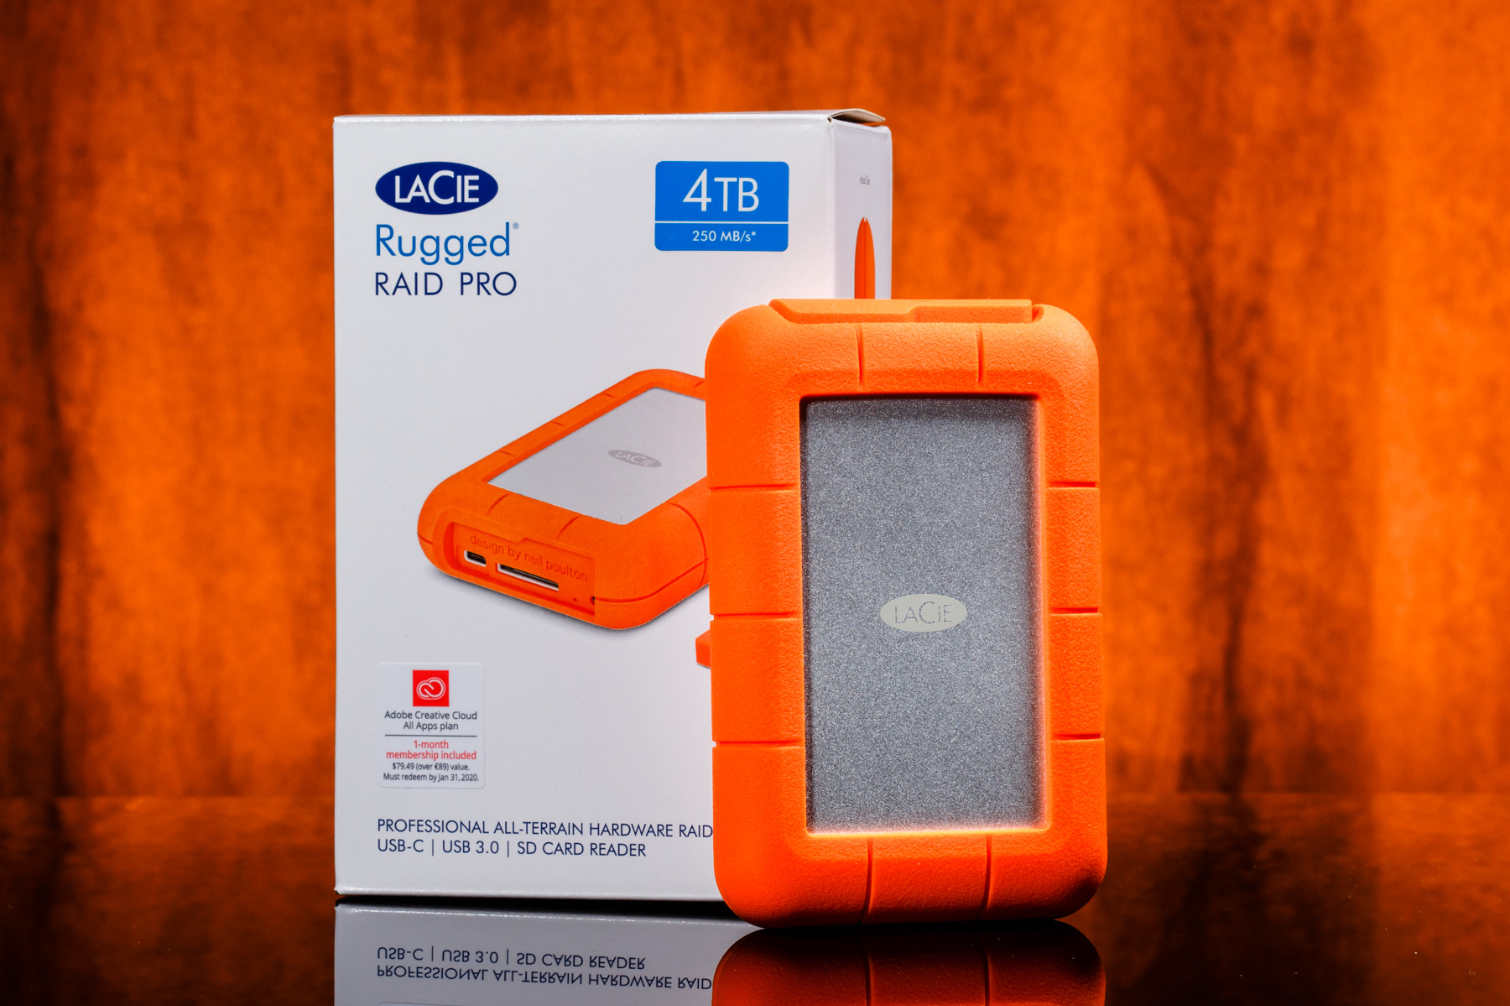 kruis Ongewijzigd Gezond eten LaCie Rugged RAID Pro 4TB Review: A Tough HDD Built for Speed - Tom's  Hardware | Tom's Hardware